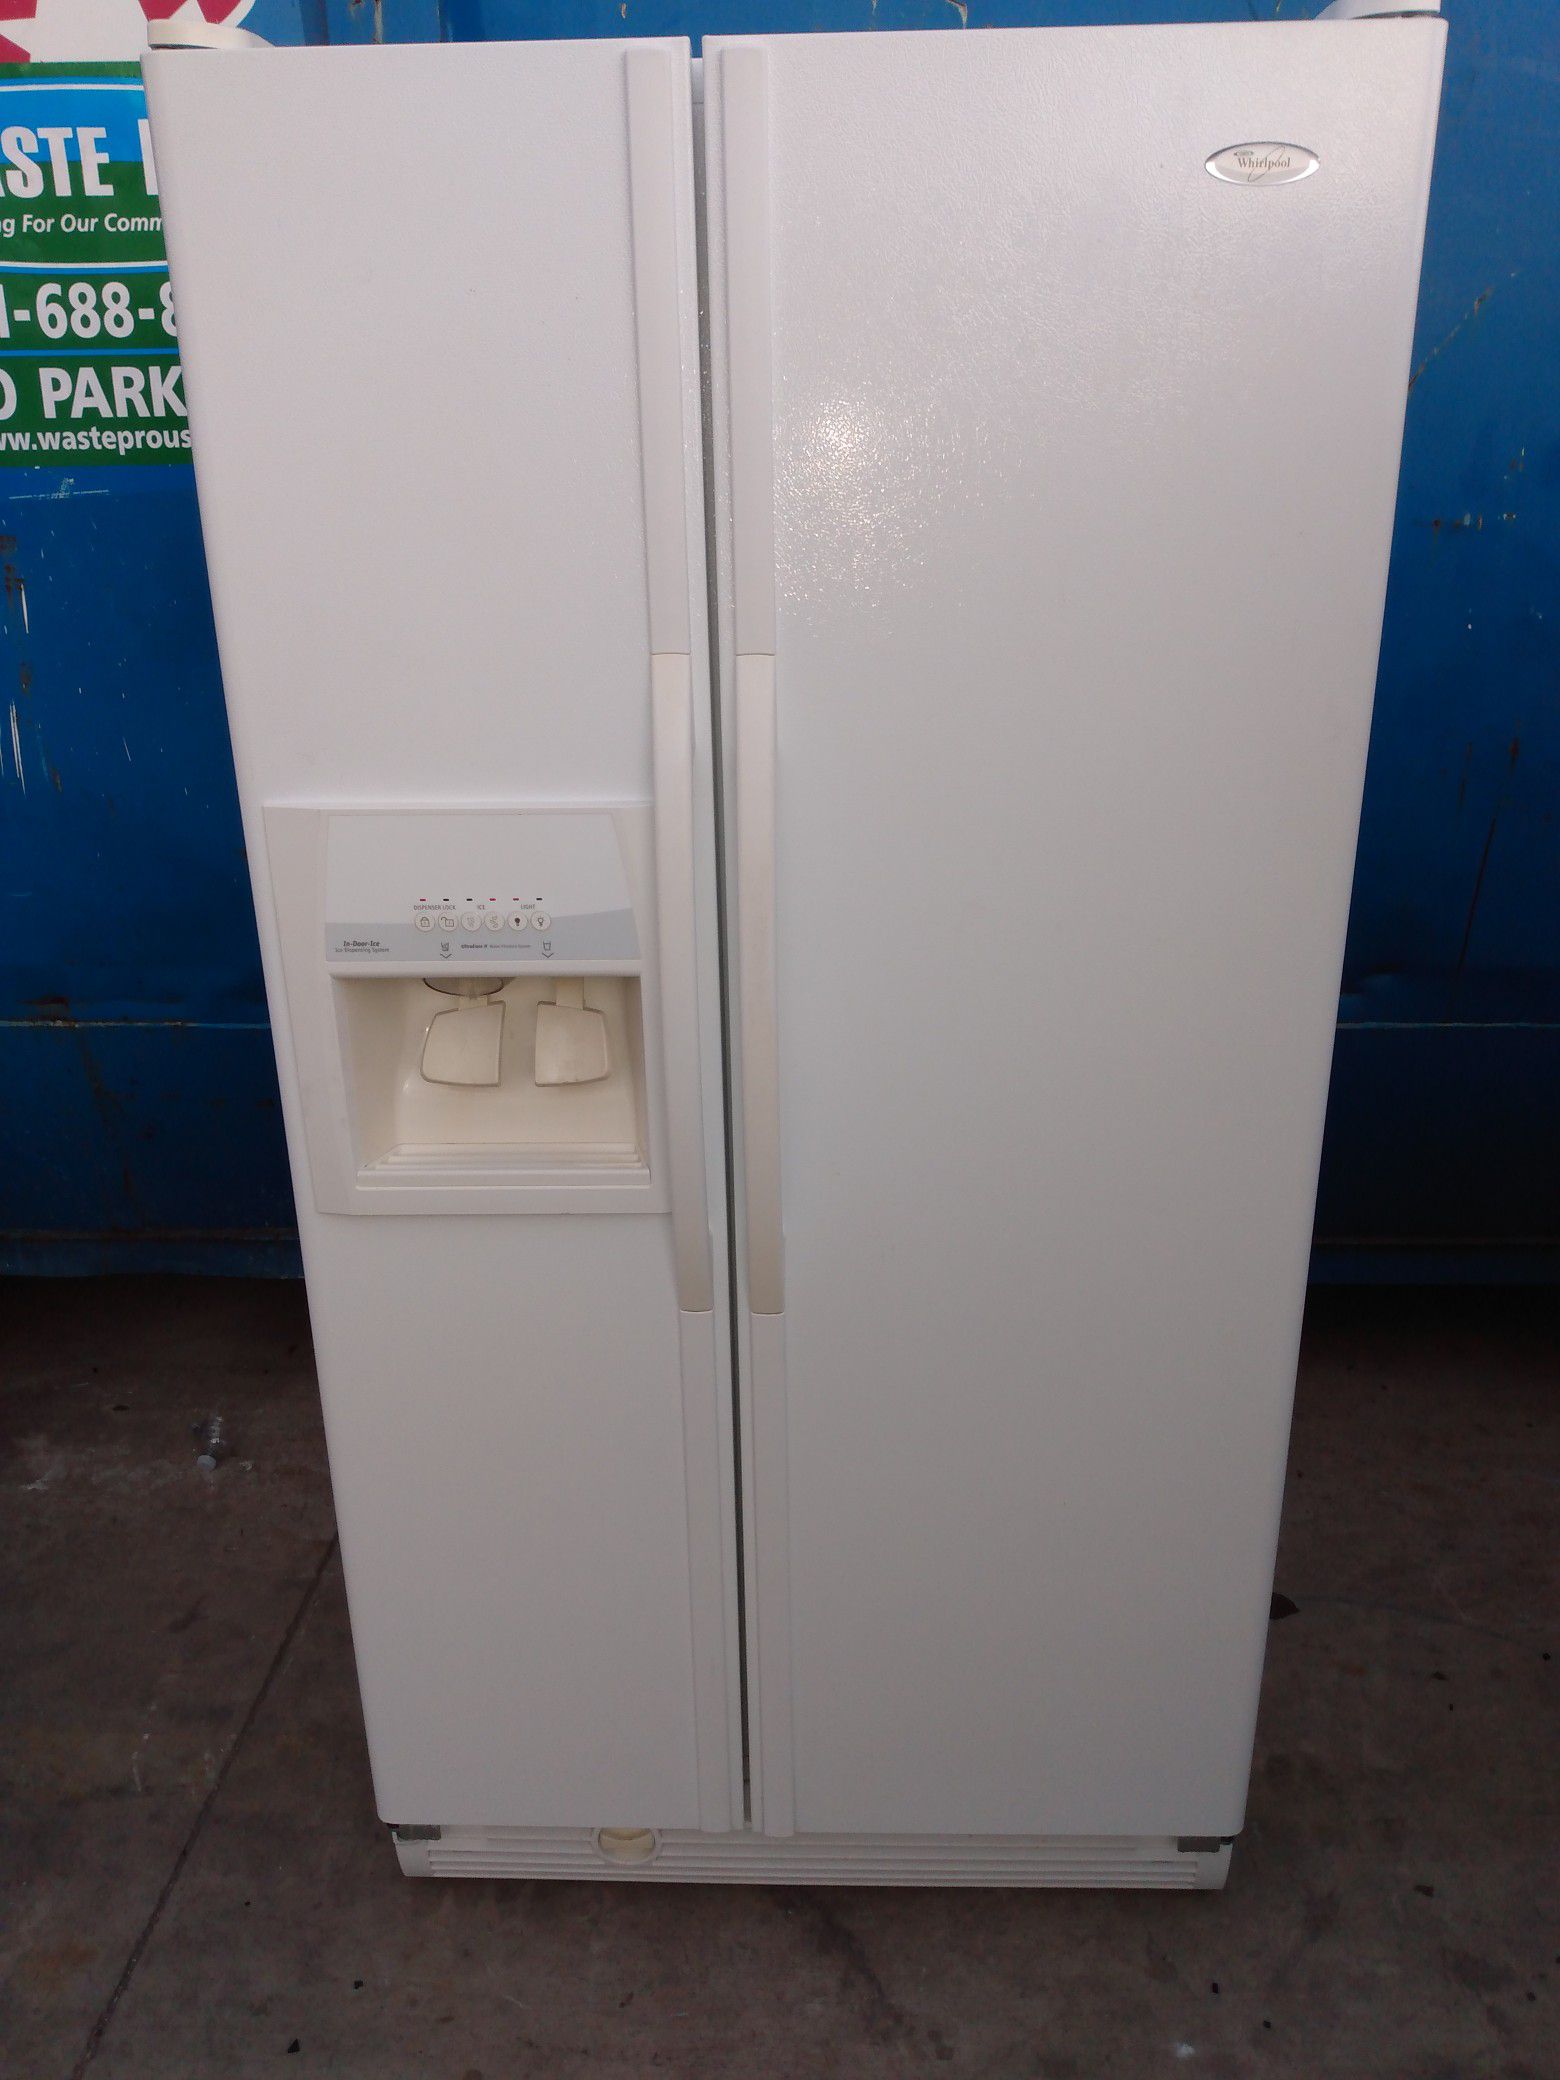 BEAUTIFUL SIDE BY SIDE REFRIGERATOR PRICE FIRM